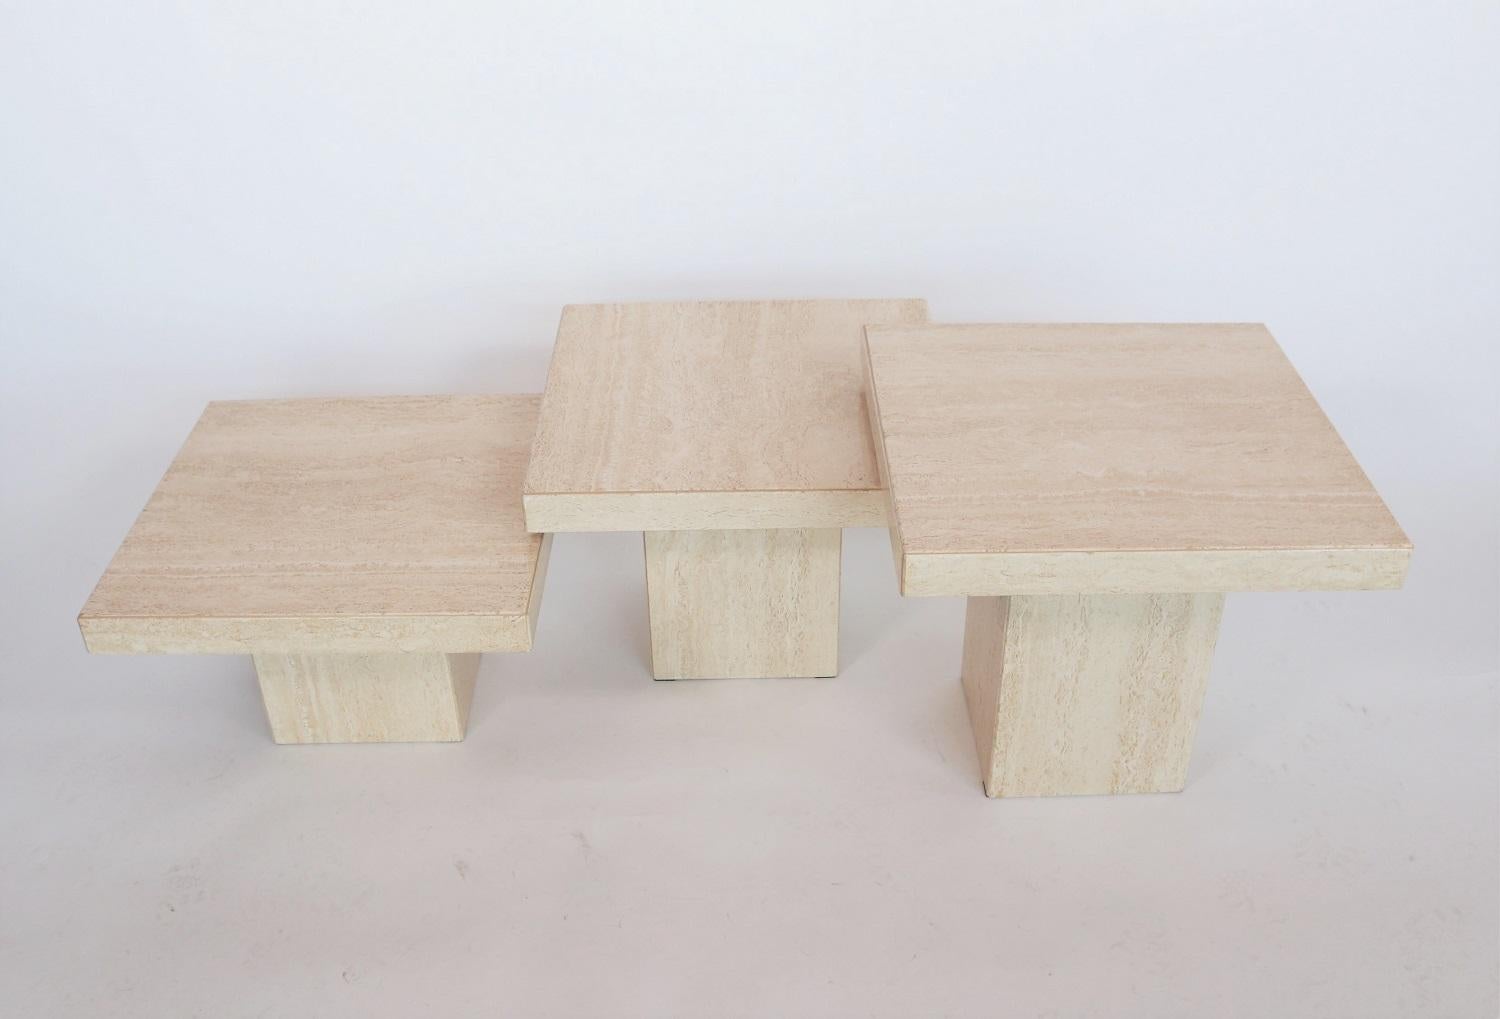 Gorgeous set of three different travertine marble coffee tables from the rich Italian Regency period during the 1970s. Made in Italy.
The tables have a beautiful cream color and gorgeous marble structure.
The three square bases are of different